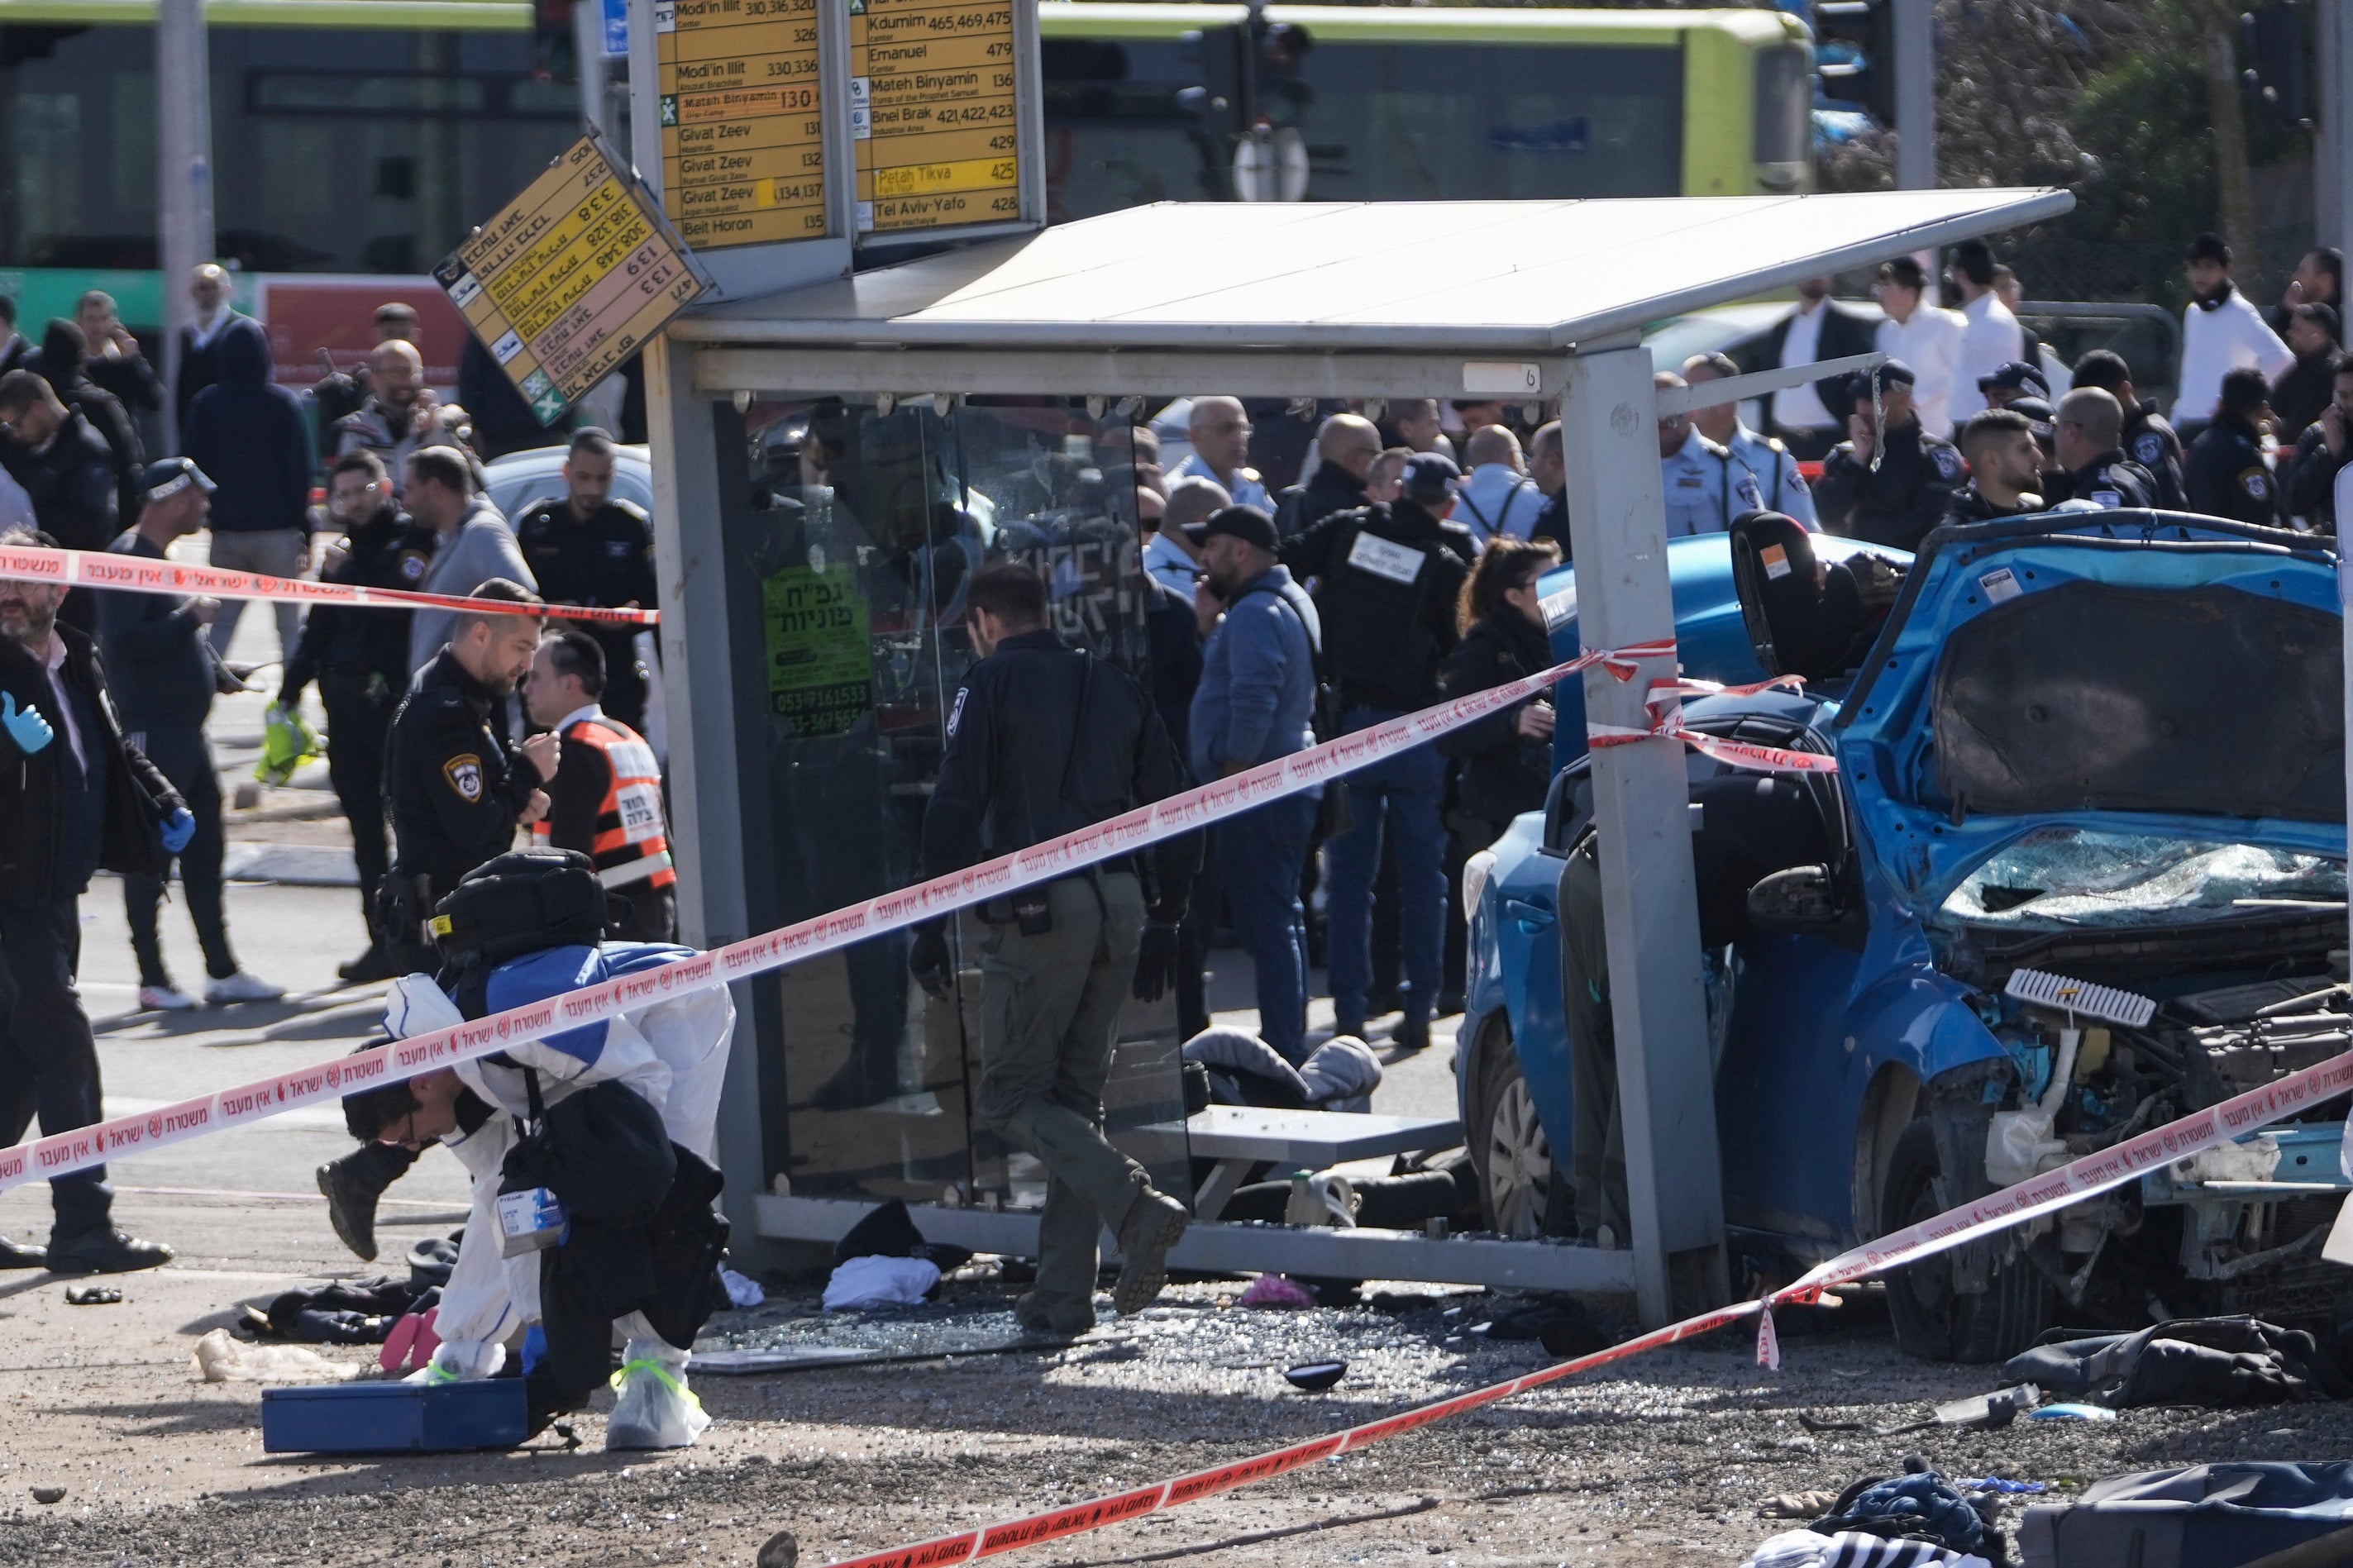 Israeli police forensic team work at the scene in Ramot, a Jewish settlement in east Jerusalem